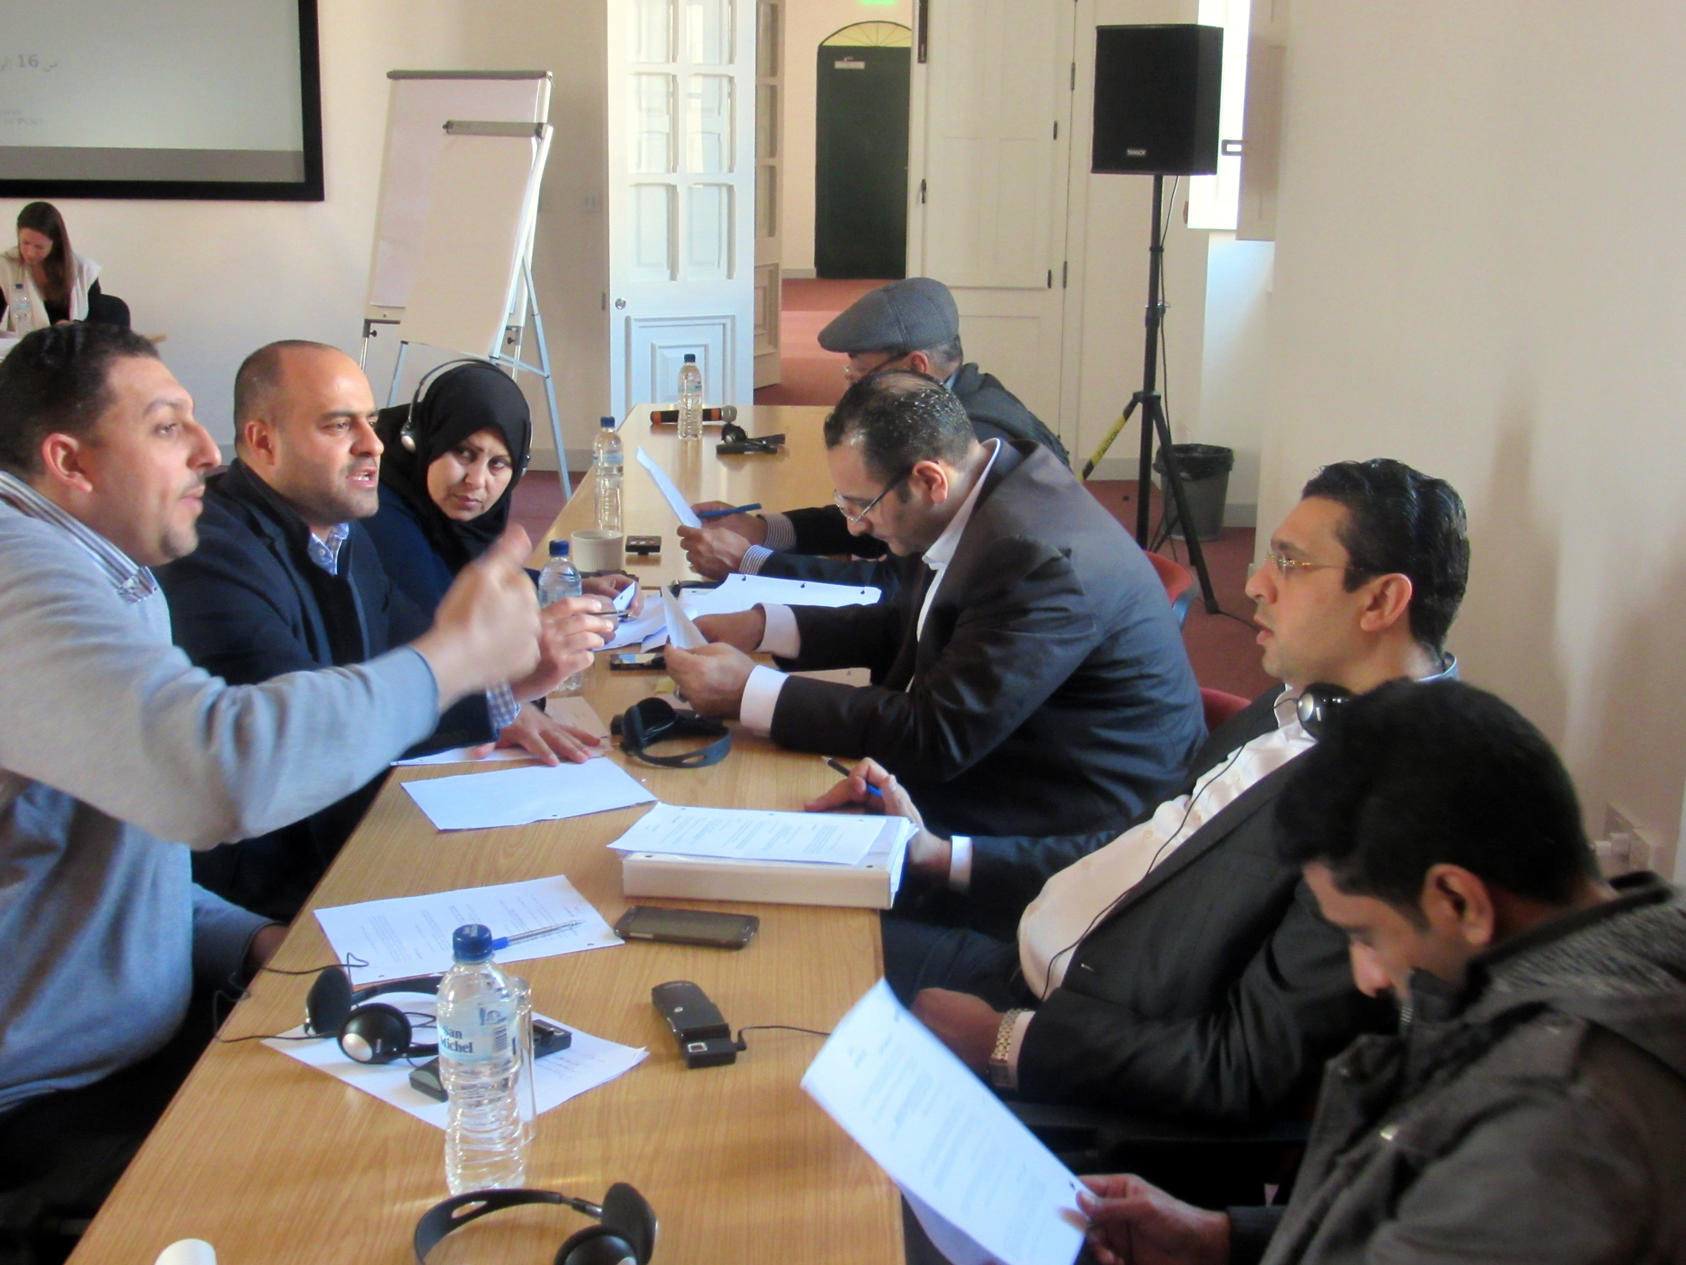 Justice and security officials from Egypt, Lebanon, Libya, Jordan, Tunisia and Yemen take part in a small-group exercise in problem-solving, one of the key features of the USIP course conducted with the International Institute for Justice and the Rule of Law.